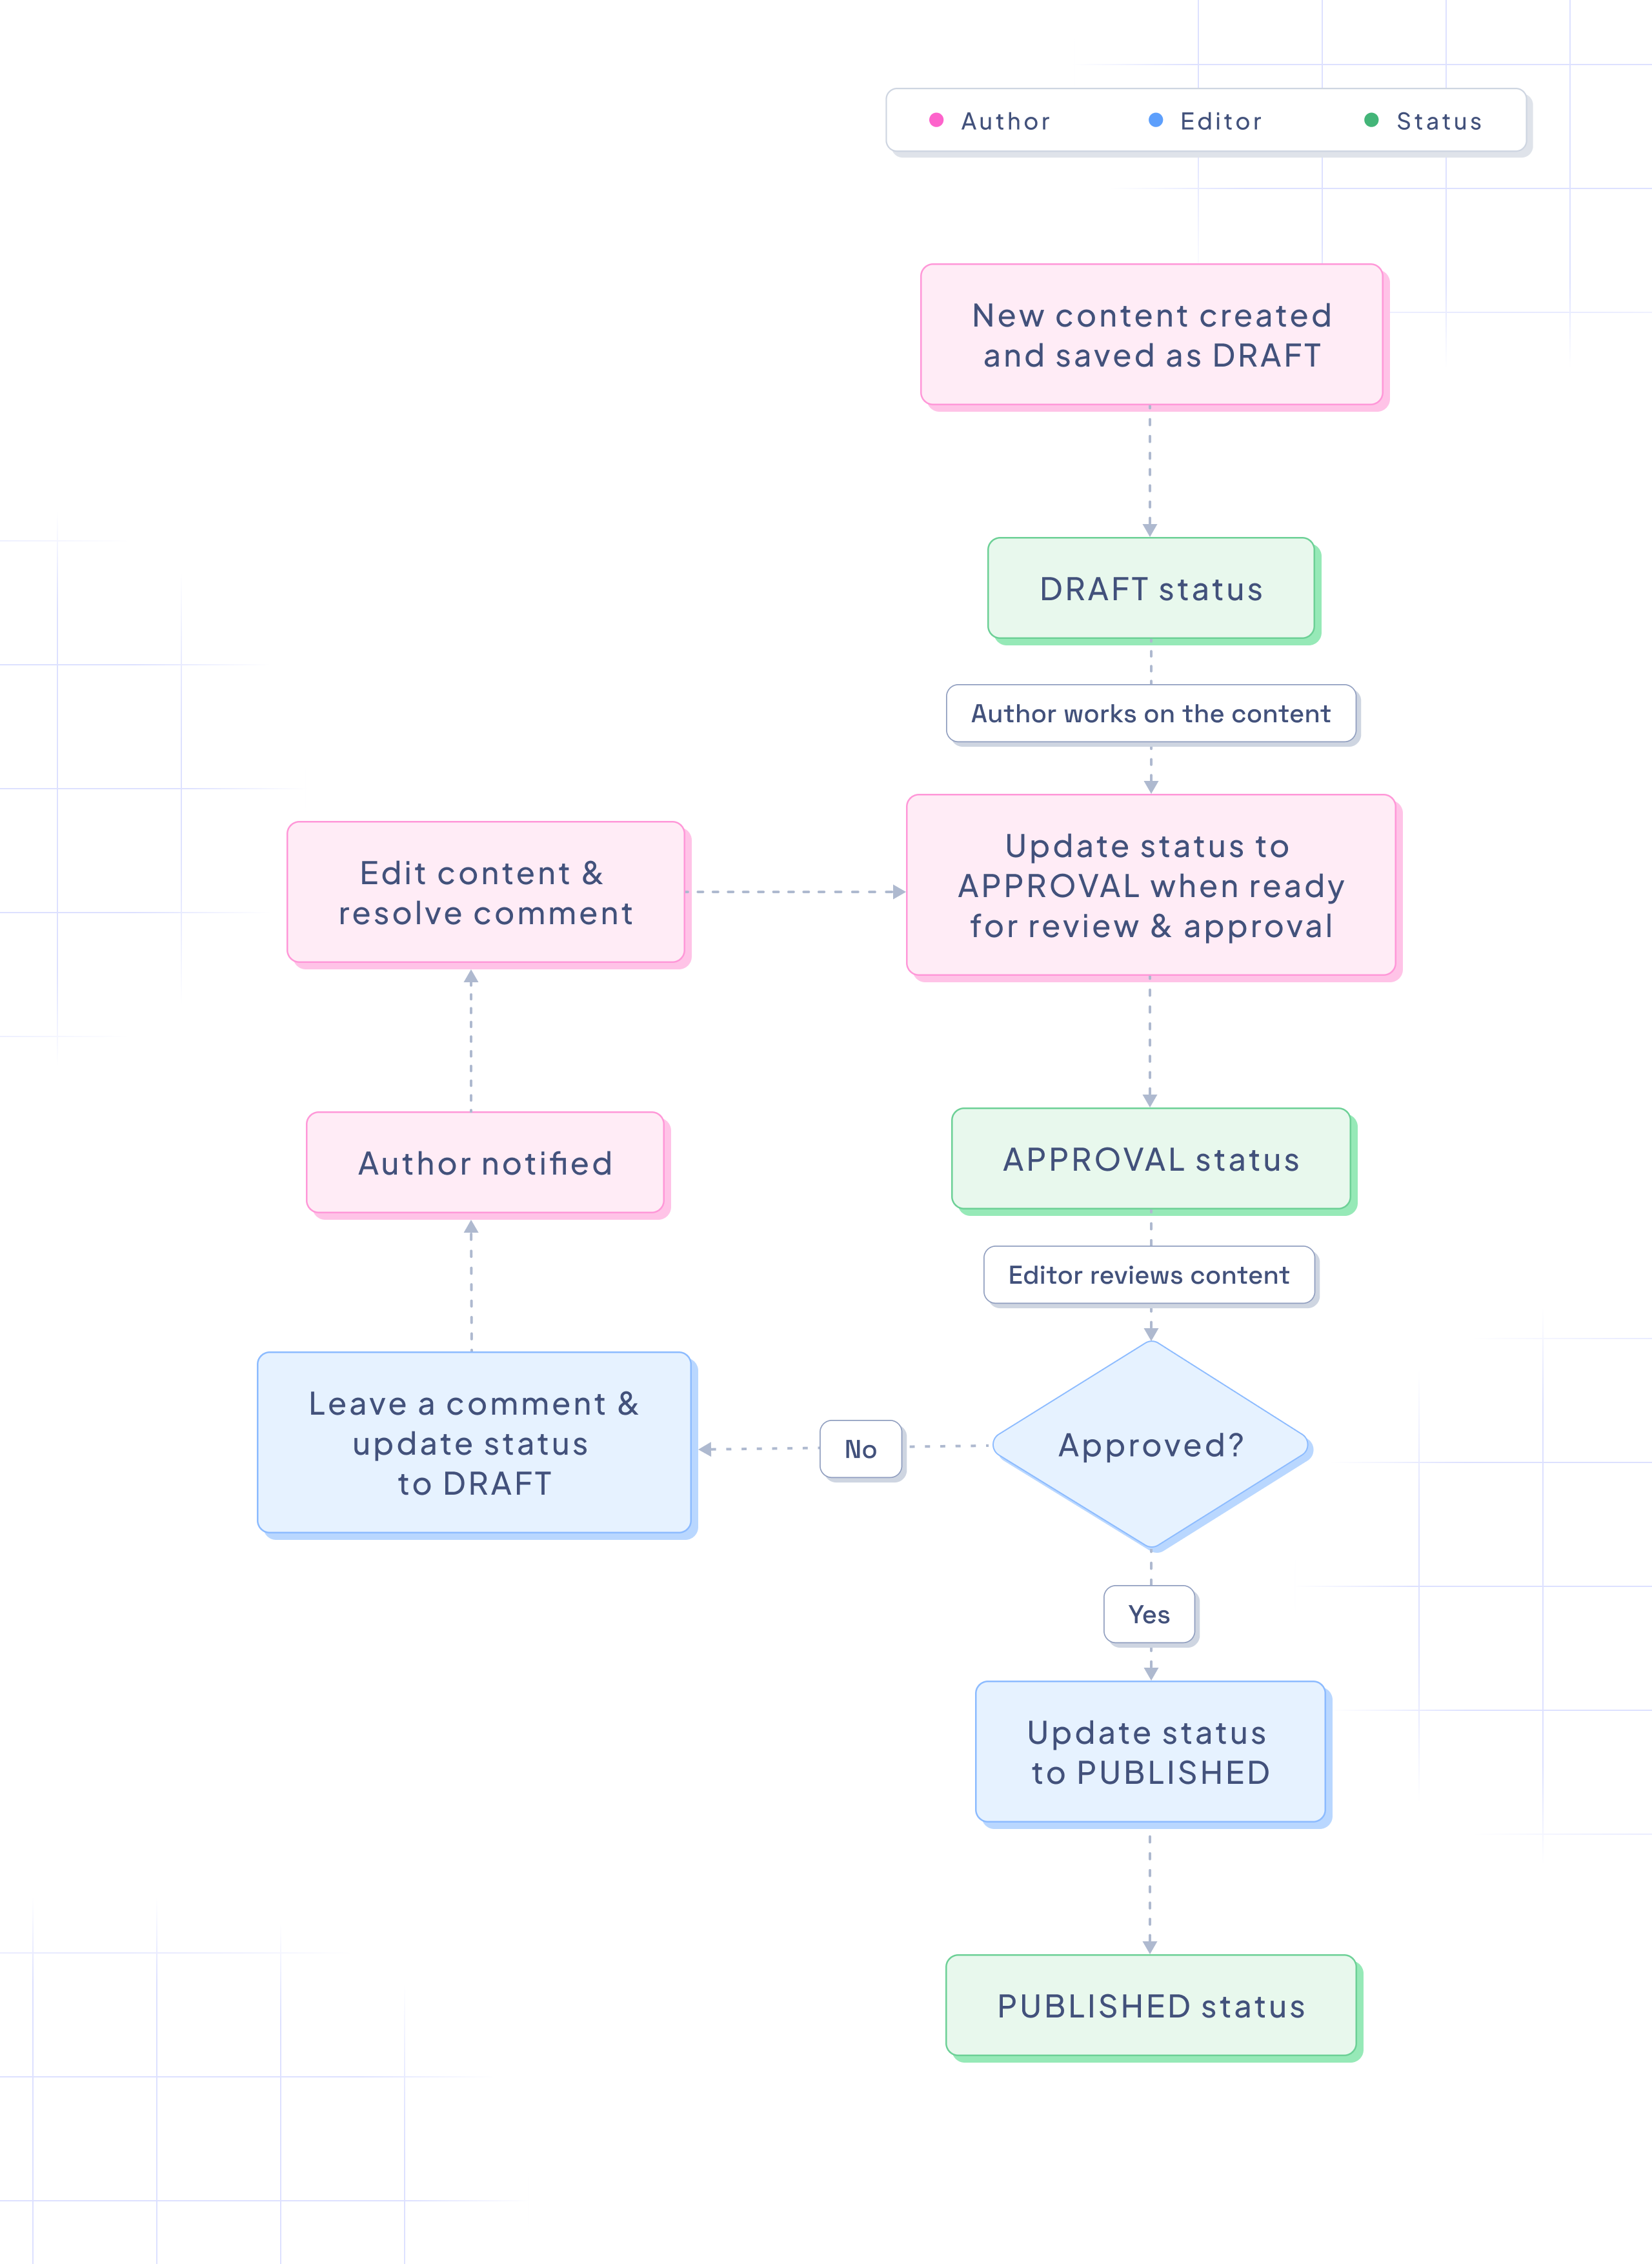 Approval flow with 3 stages